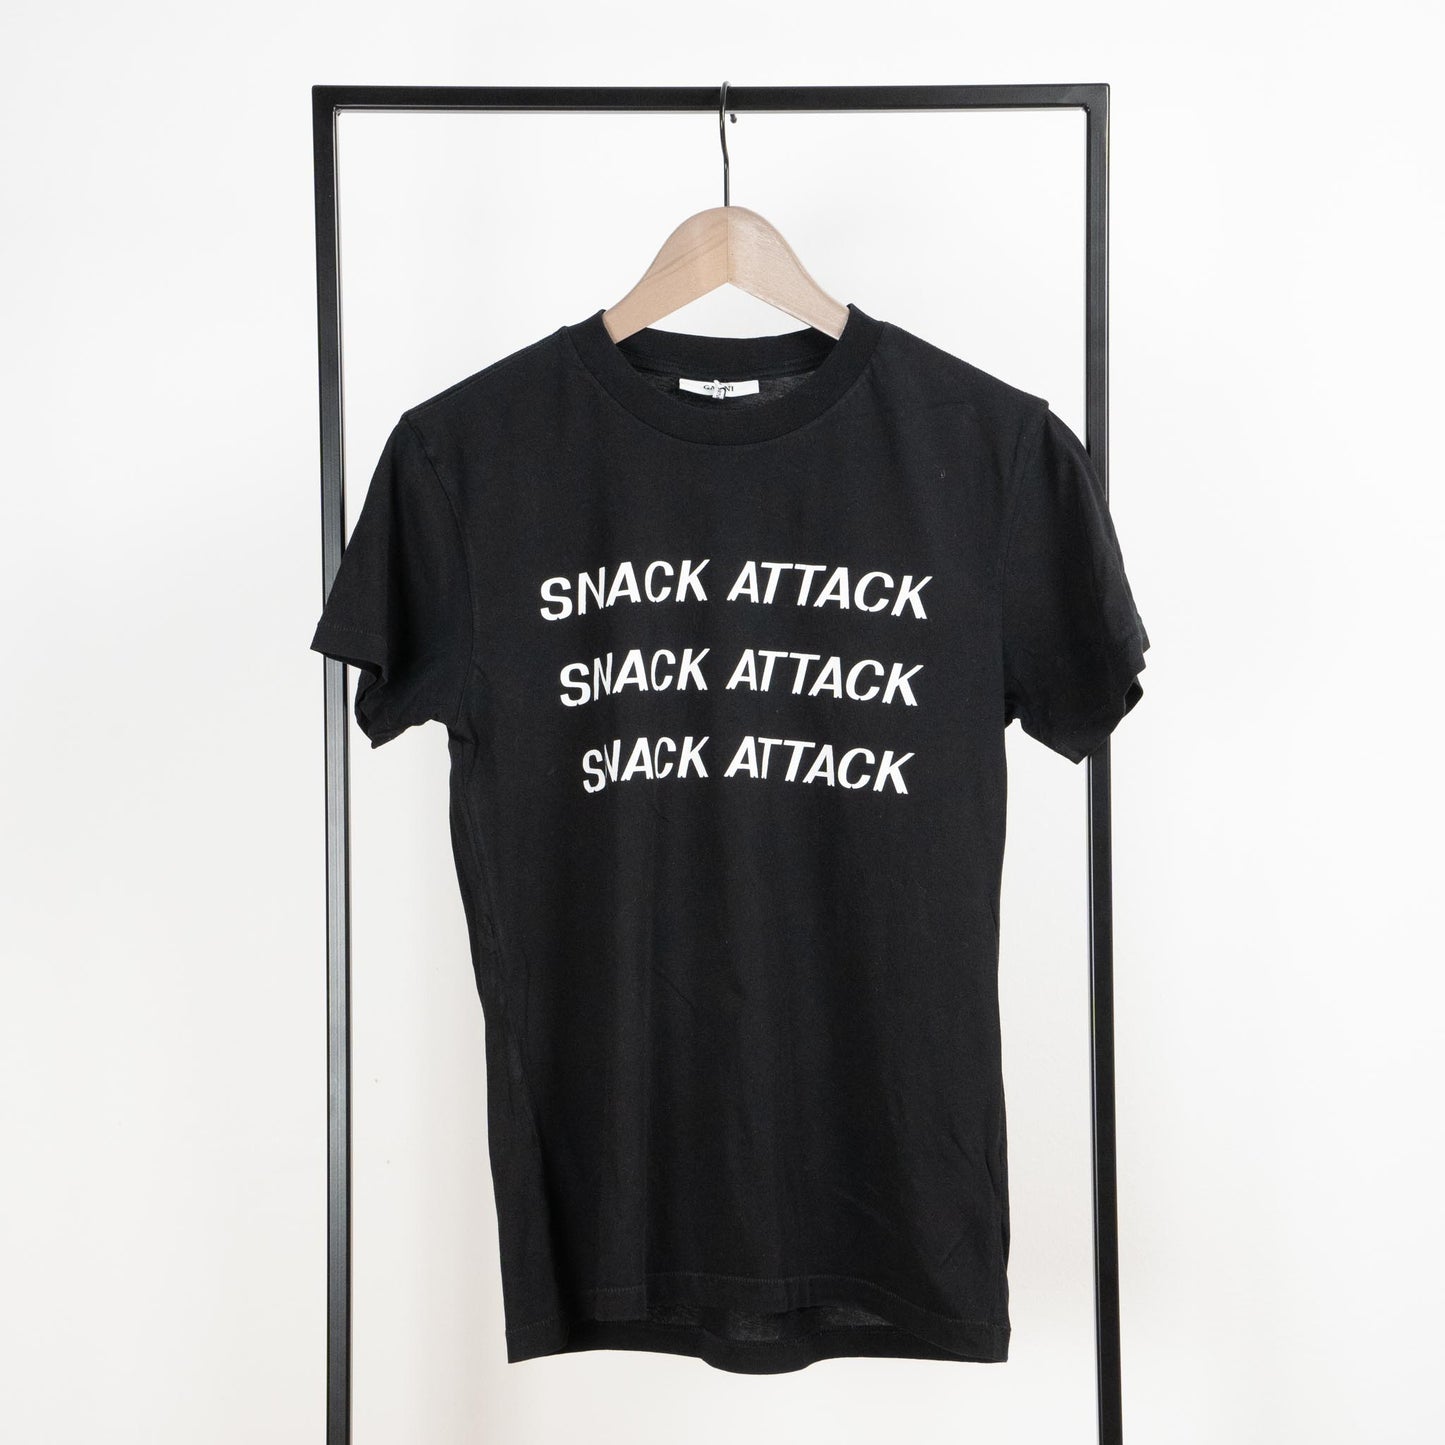 Snack Attack T-shirt